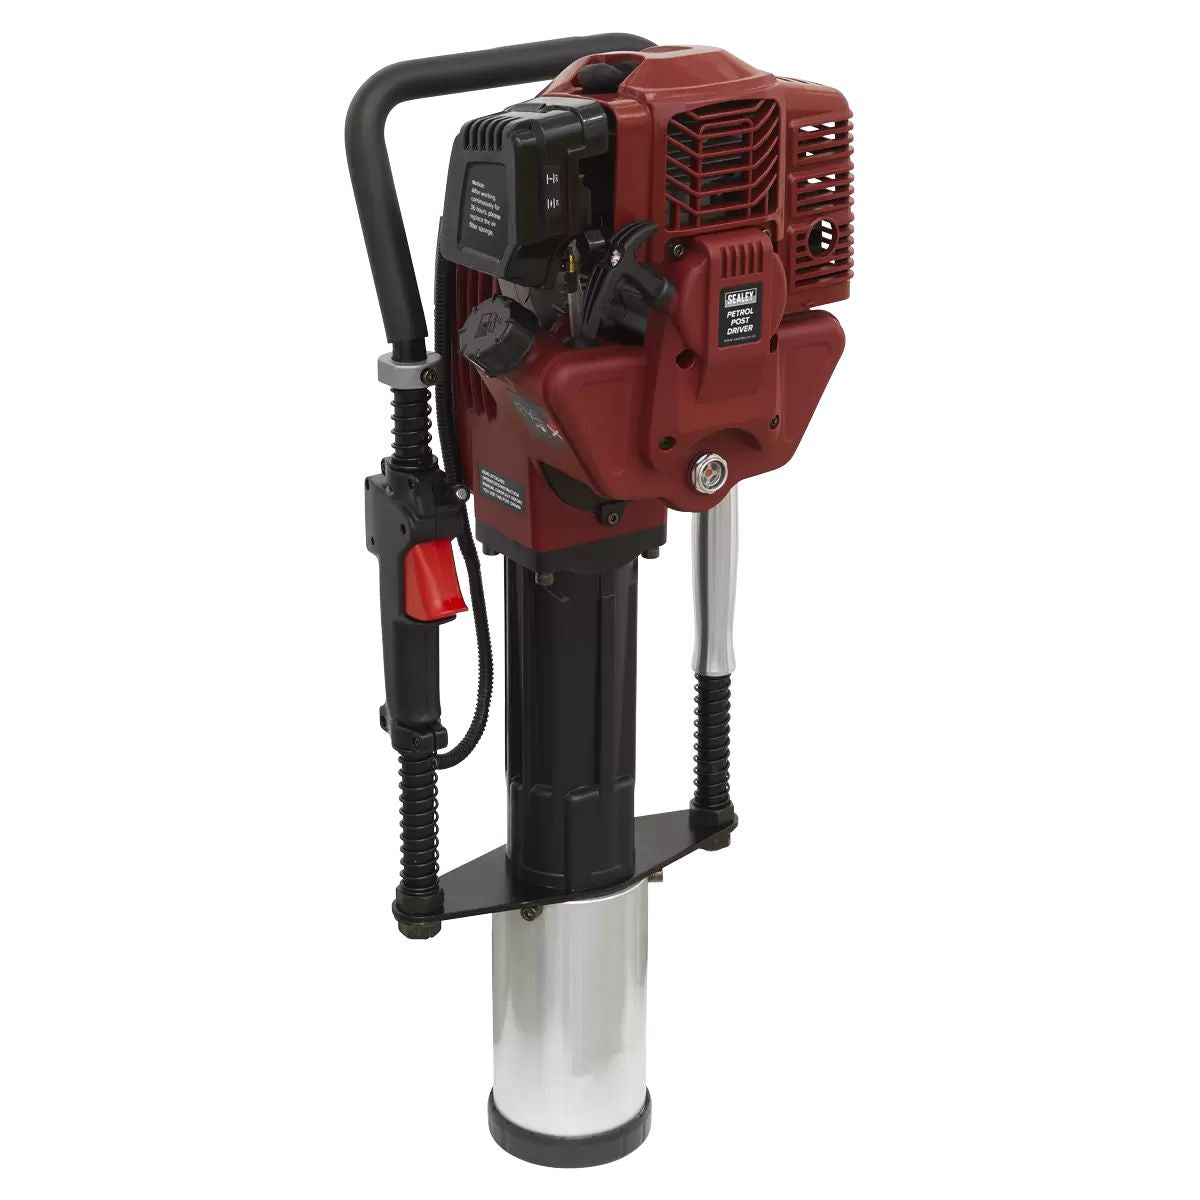 Sealey PPD100 2-Stroke Petrol Post Driver 100mm